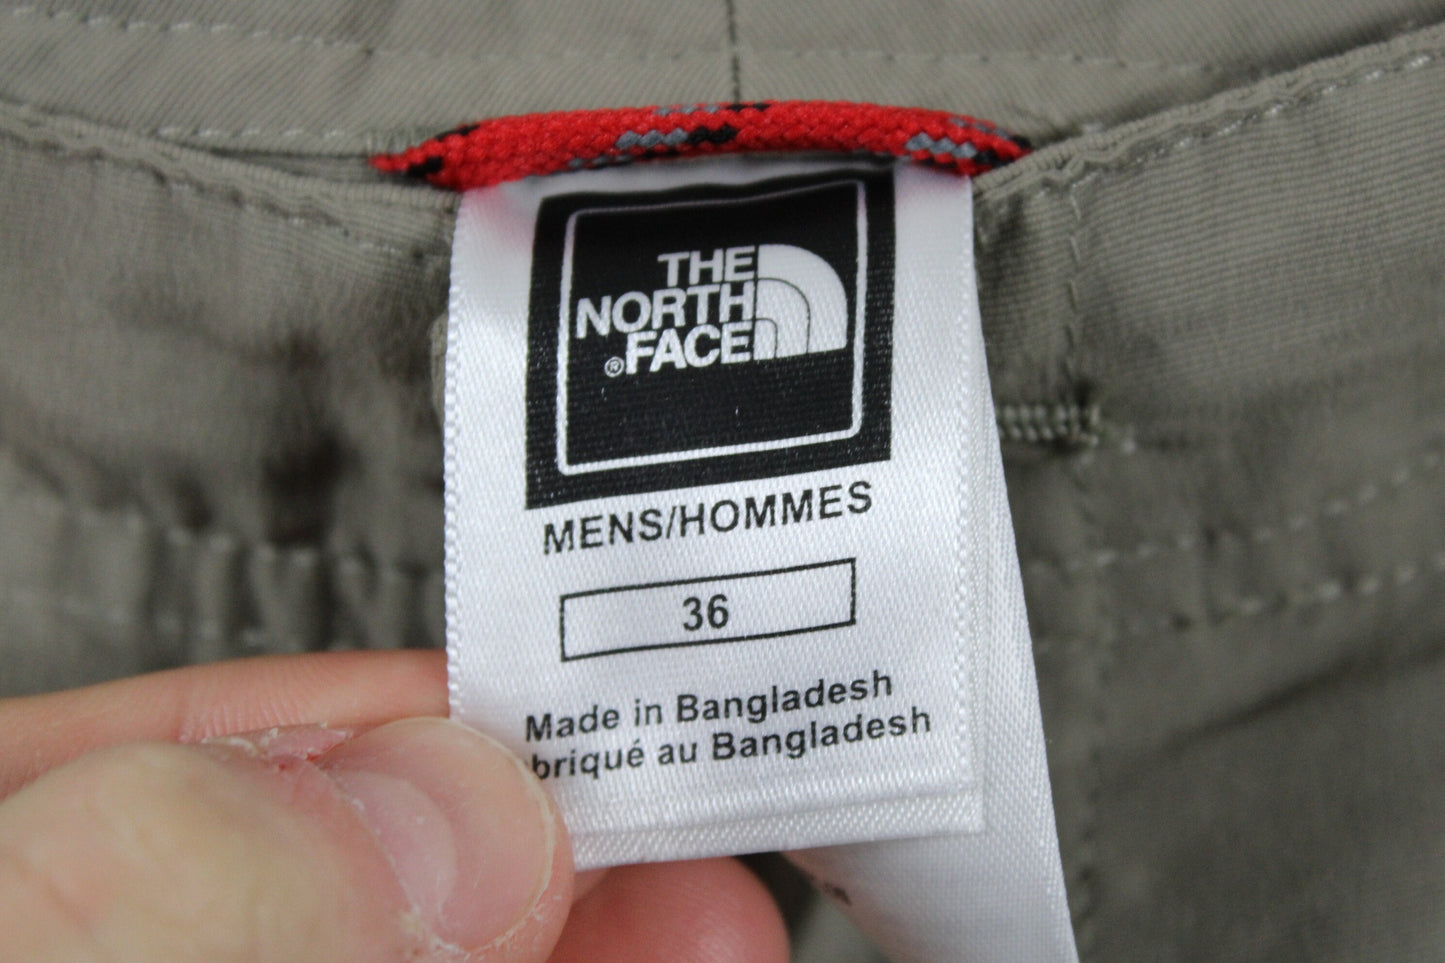 The-North-Face Climber-Pants / Vintage Windbreaker Tearaways Style Joggers / 90s Streetwear / Hip Hop Clothing / Men's TNF